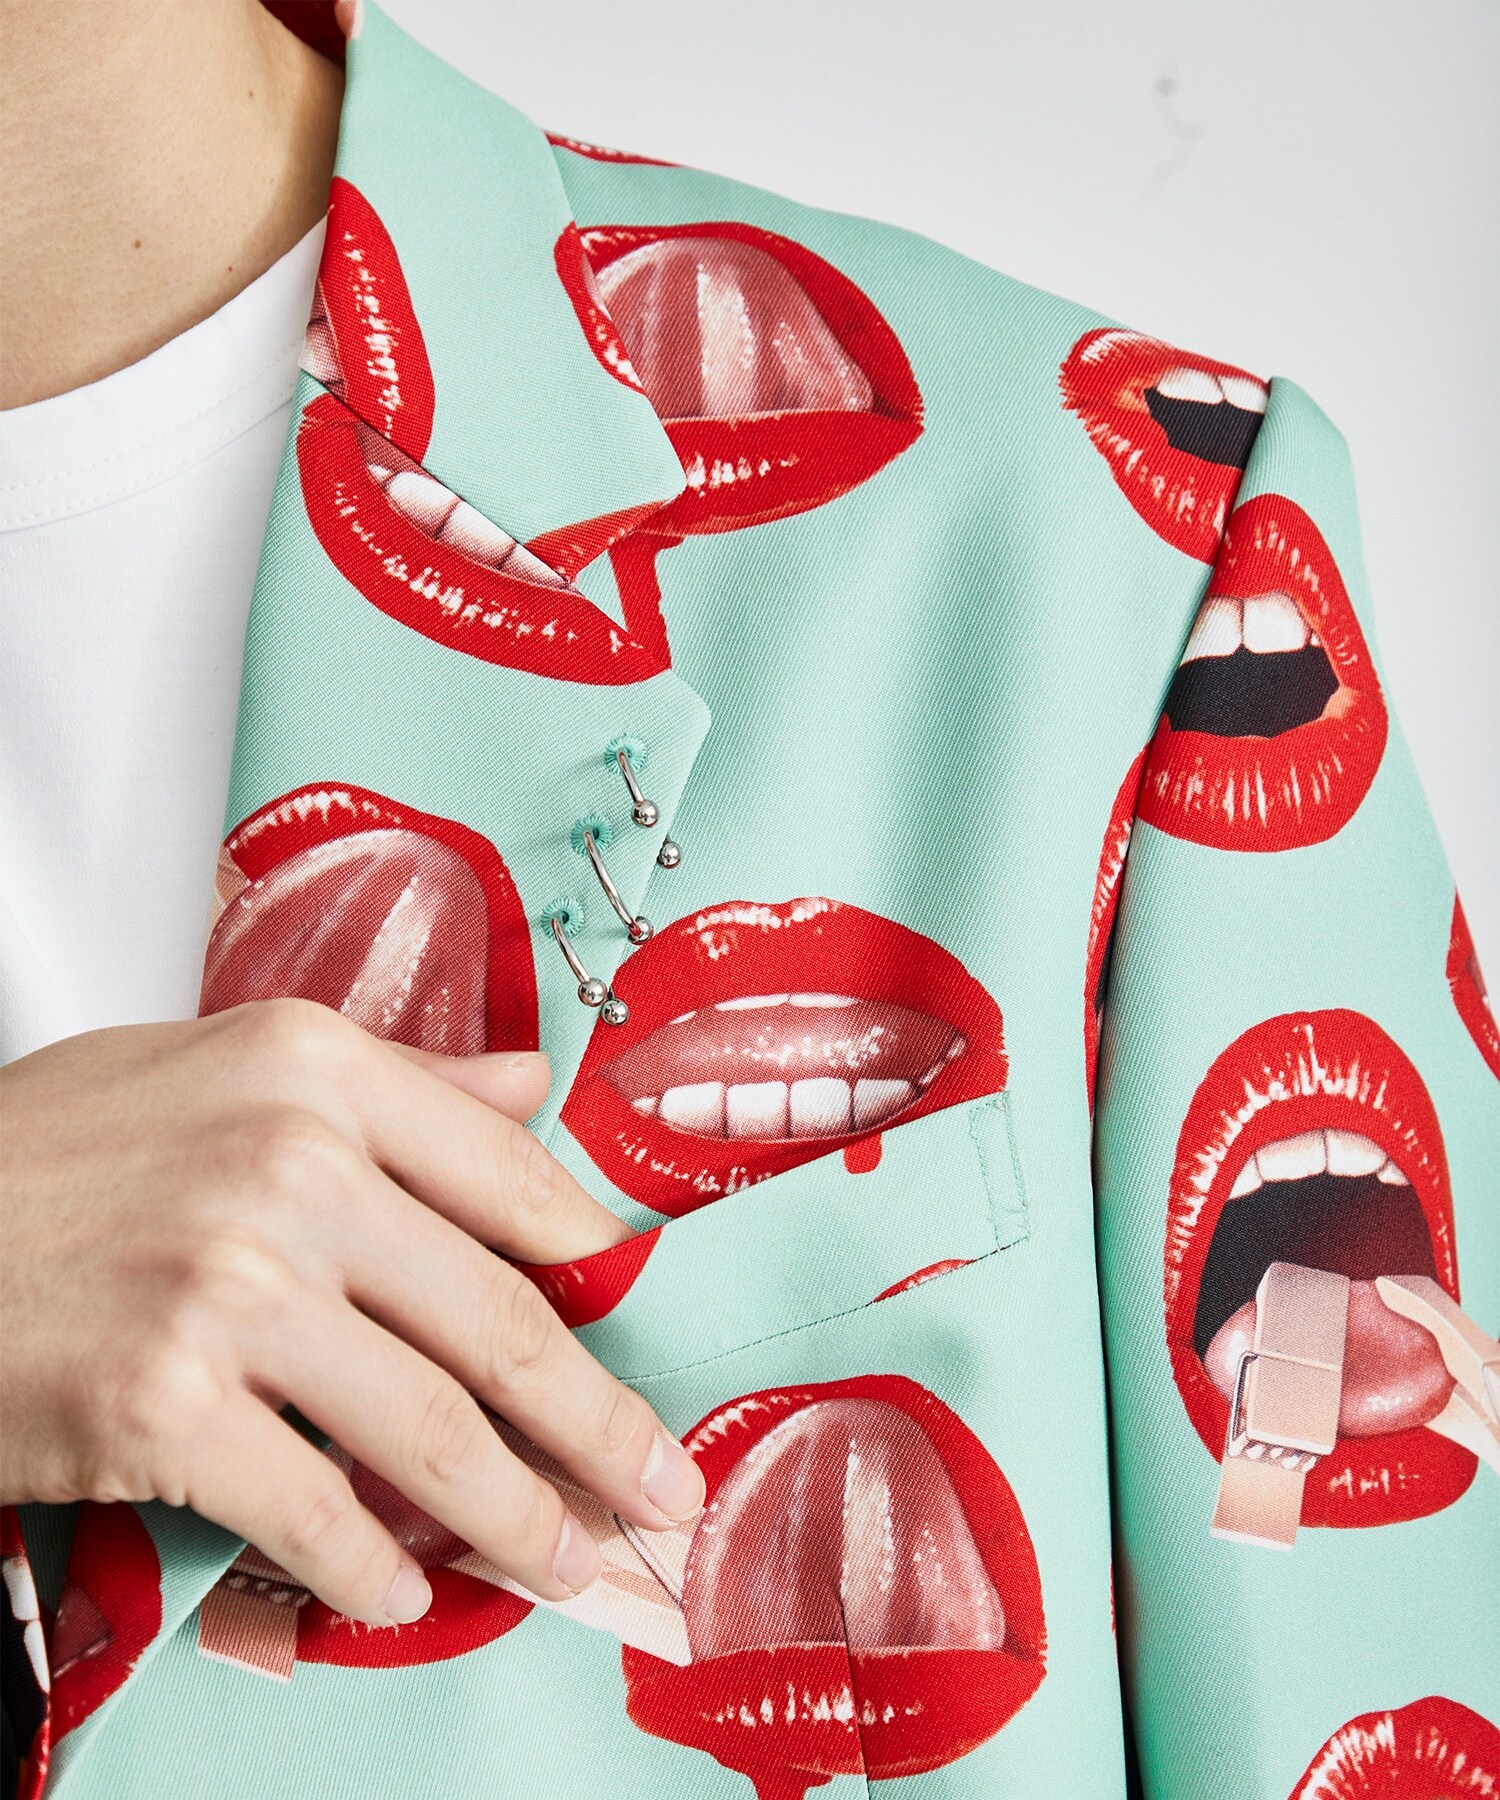 Tailored Jacket - FOUR MOUTHArtwork by TREVOR BROWN KIDILL